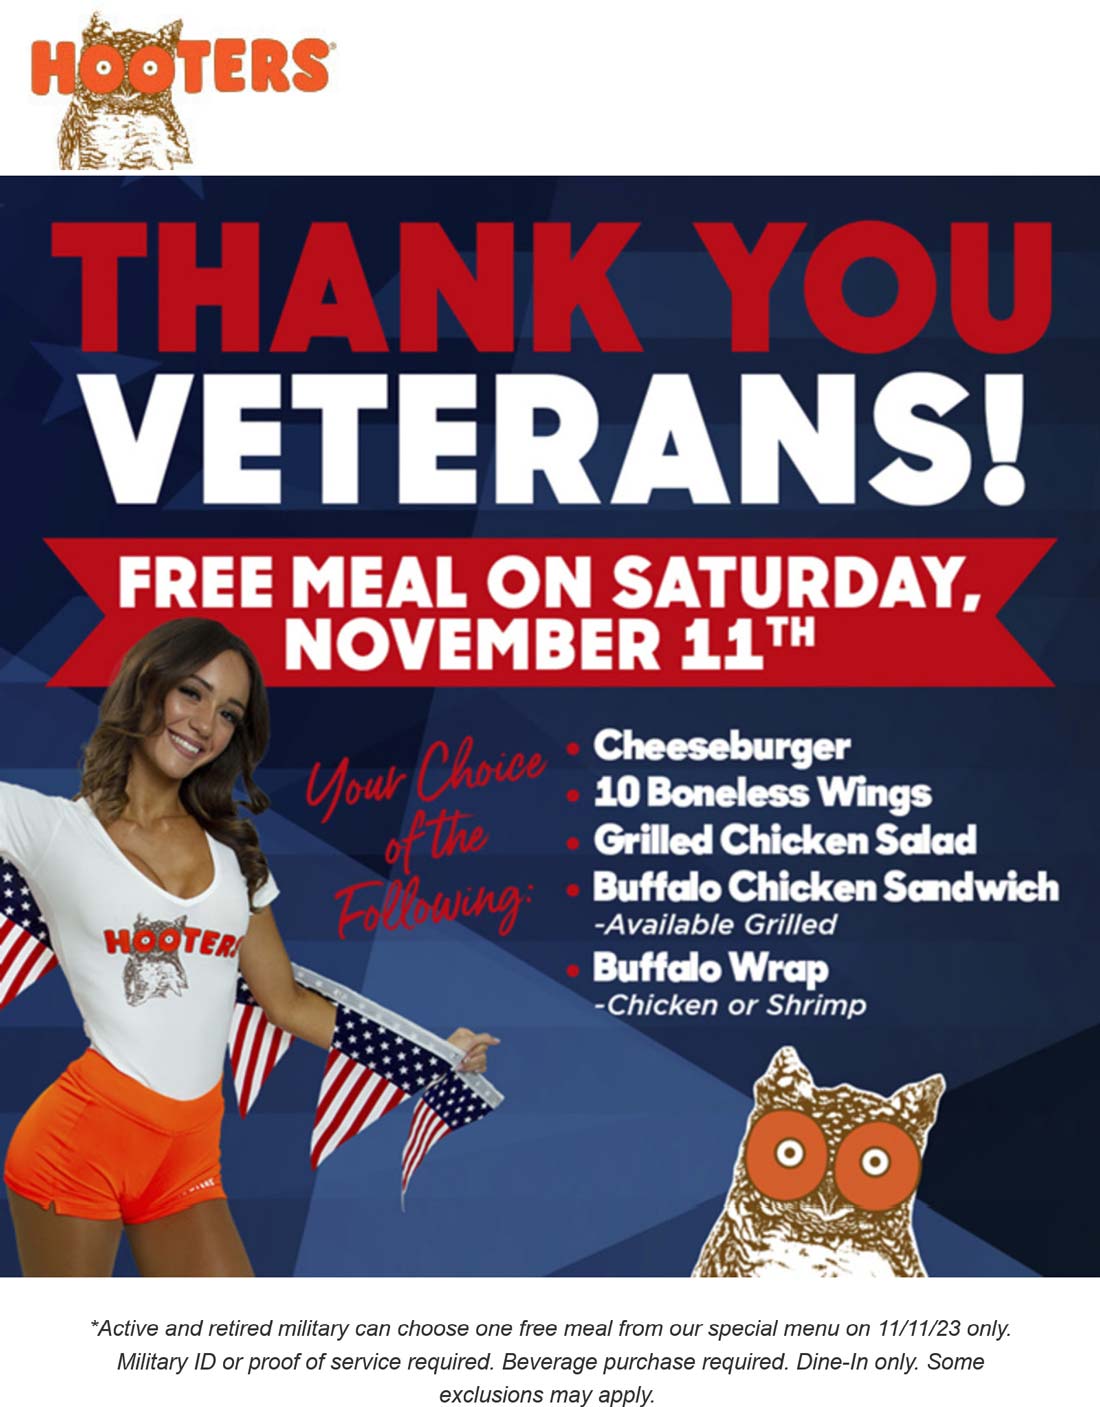 Veterans & active enjoy a free meal Saturday at Hooters #hooters